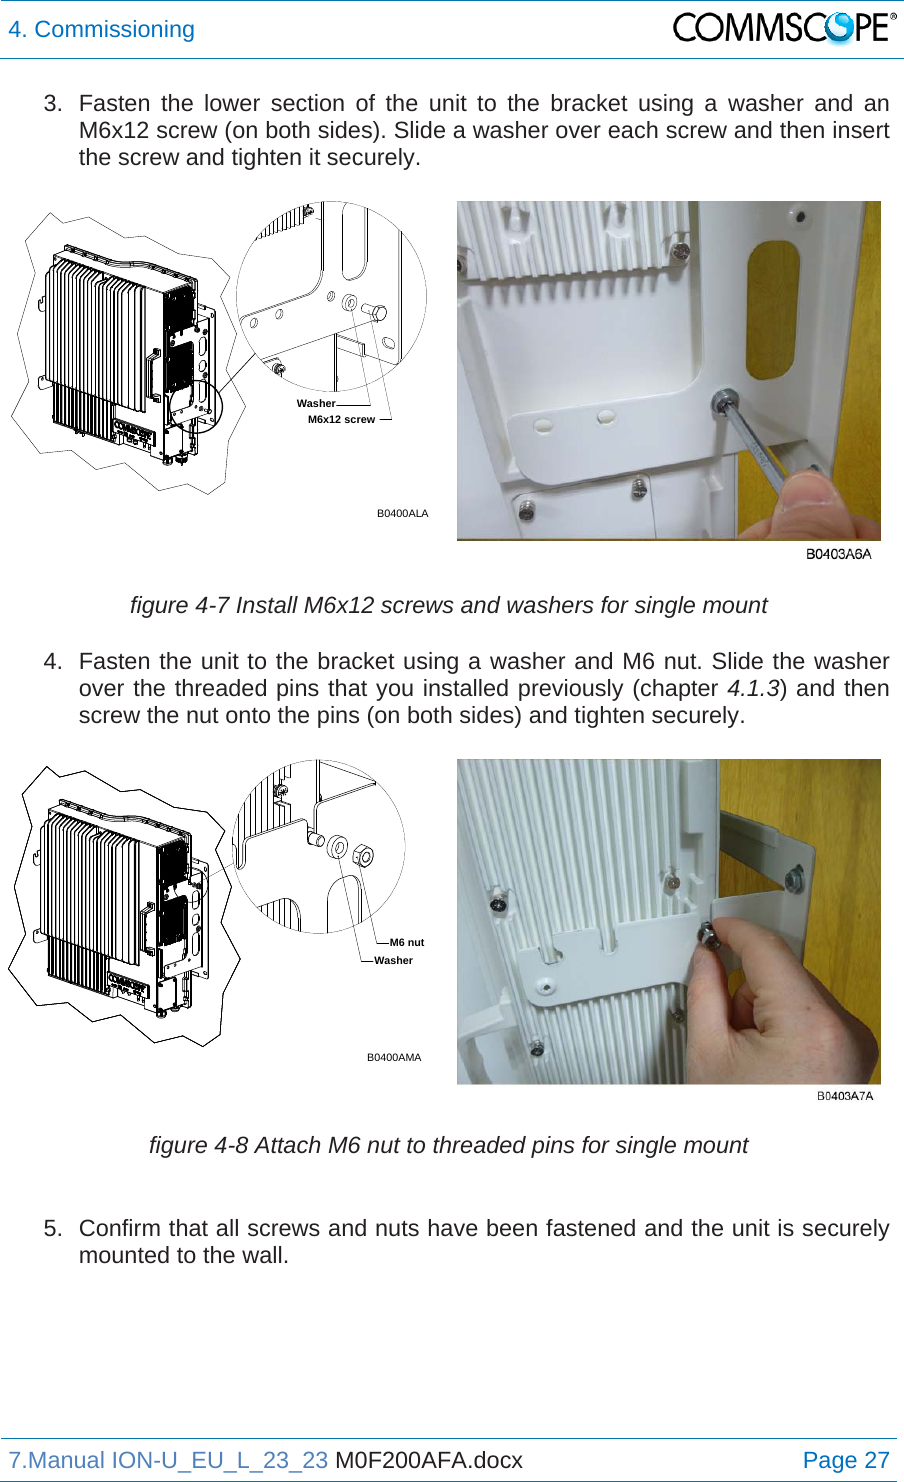 4. Commissioning  7.Manual ION-U_EU_L_23_23 M0F200AFA.docx Page 27 3.  Fasten the lower section of the unit to the bracket using a washer and an M6x12 screw (on both sides). Slide a washer over each screw and then insert the screw and tighten it securely. figure 4-7 Install M6x12 screws and washers for single mount 4.  Fasten the unit to the bracket using a washer and M6 nut. Slide the washer over the threaded pins that you installed previously (chapter 4.1.3) and then screw the nut onto the pins (on both sides) and tighten securely.  figure 4-8 Attach M6 nut to threaded pins for single mount  5.  Confirm that all screws and nuts have been fastened and the unit is securely mounted to the wall. B0400ALAM6x12 screwWasherB0400AMAM6 nutWasher